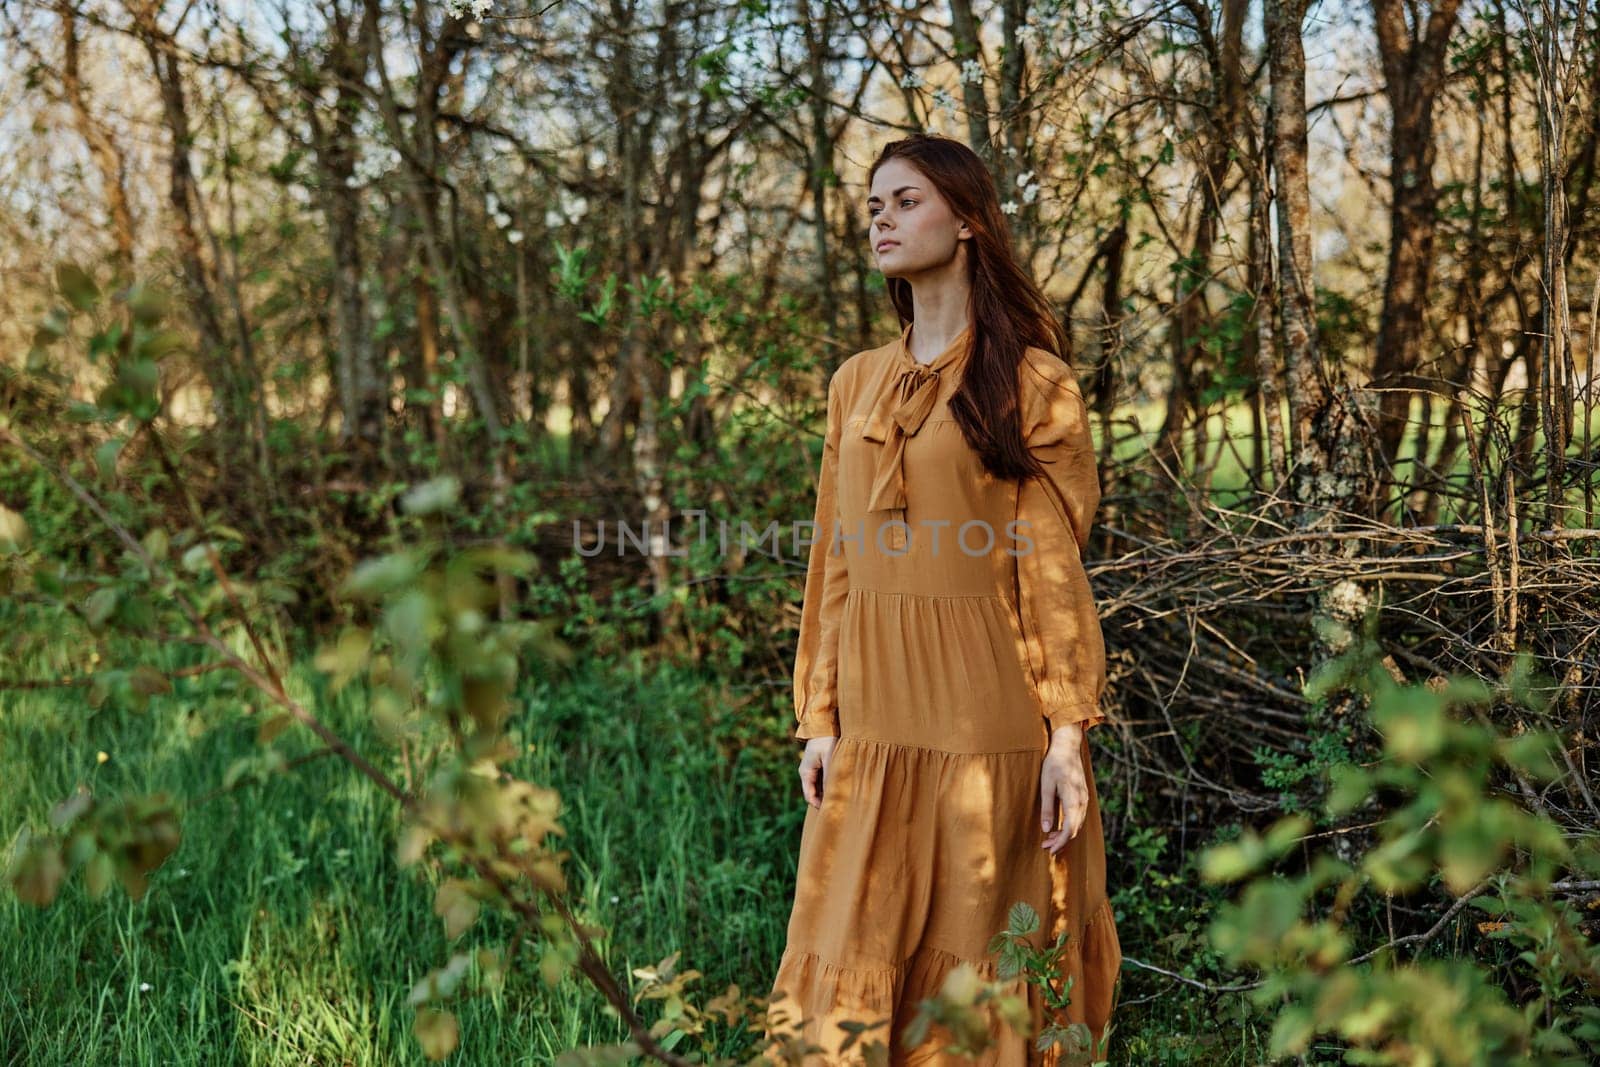 a woman with long hair walks in the shade near the trees, dressed in a long orange dress, enjoying the weather and the weekend, inspecting the trees. The theme of privacy with nature. High quality photo